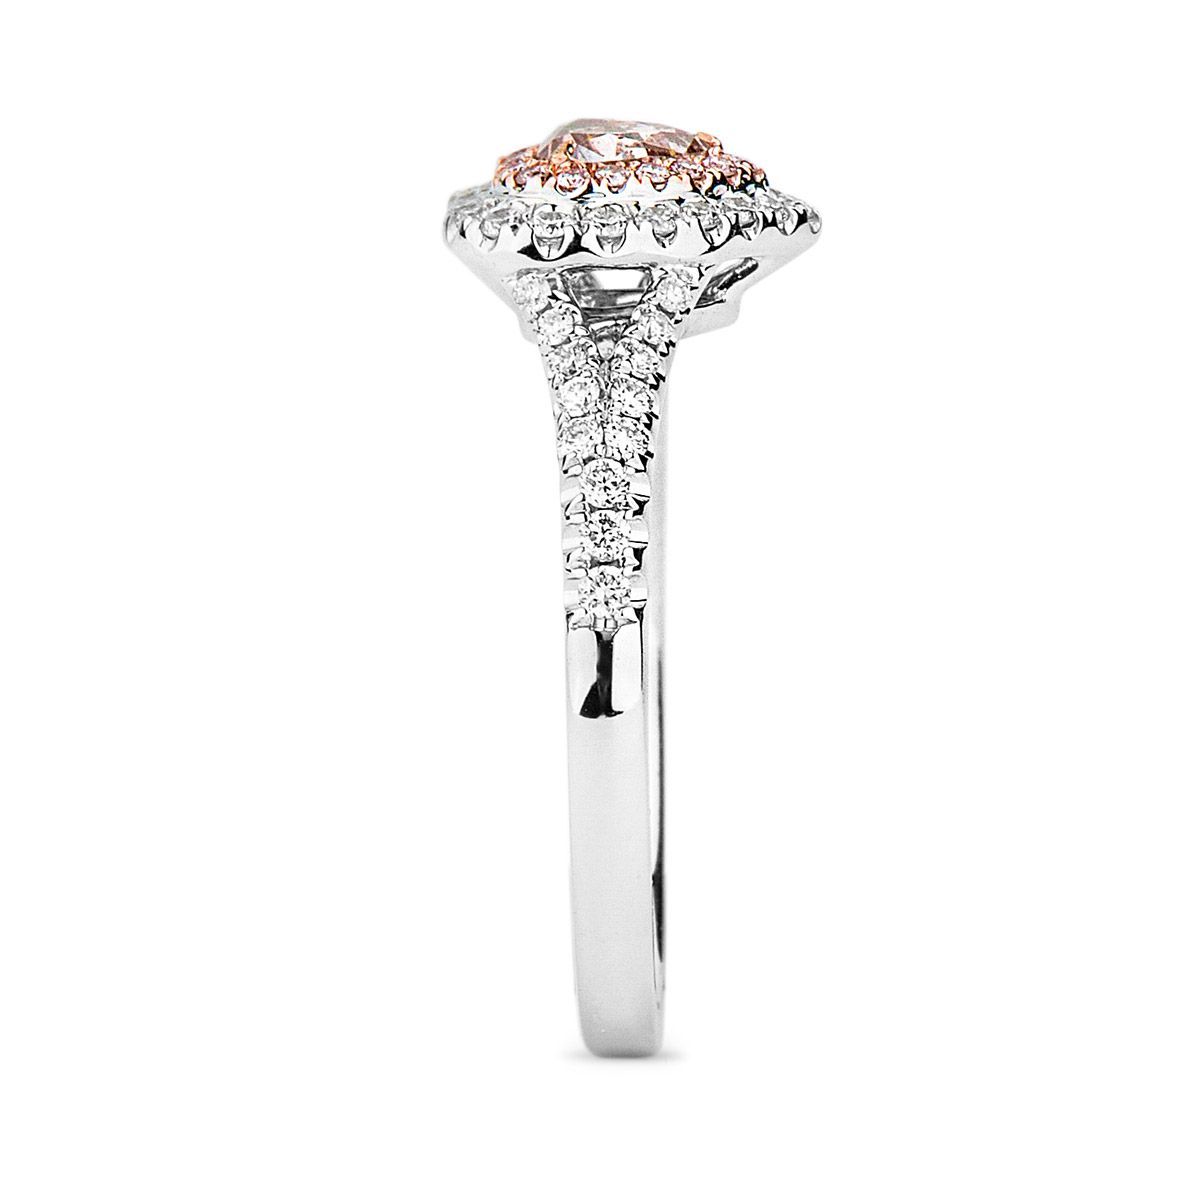 Fancy Brownish Pink Diamond Ring, 0.37 Ct. (0.76 Ct. TW), Heart shape, GIA Certified, 2175388920